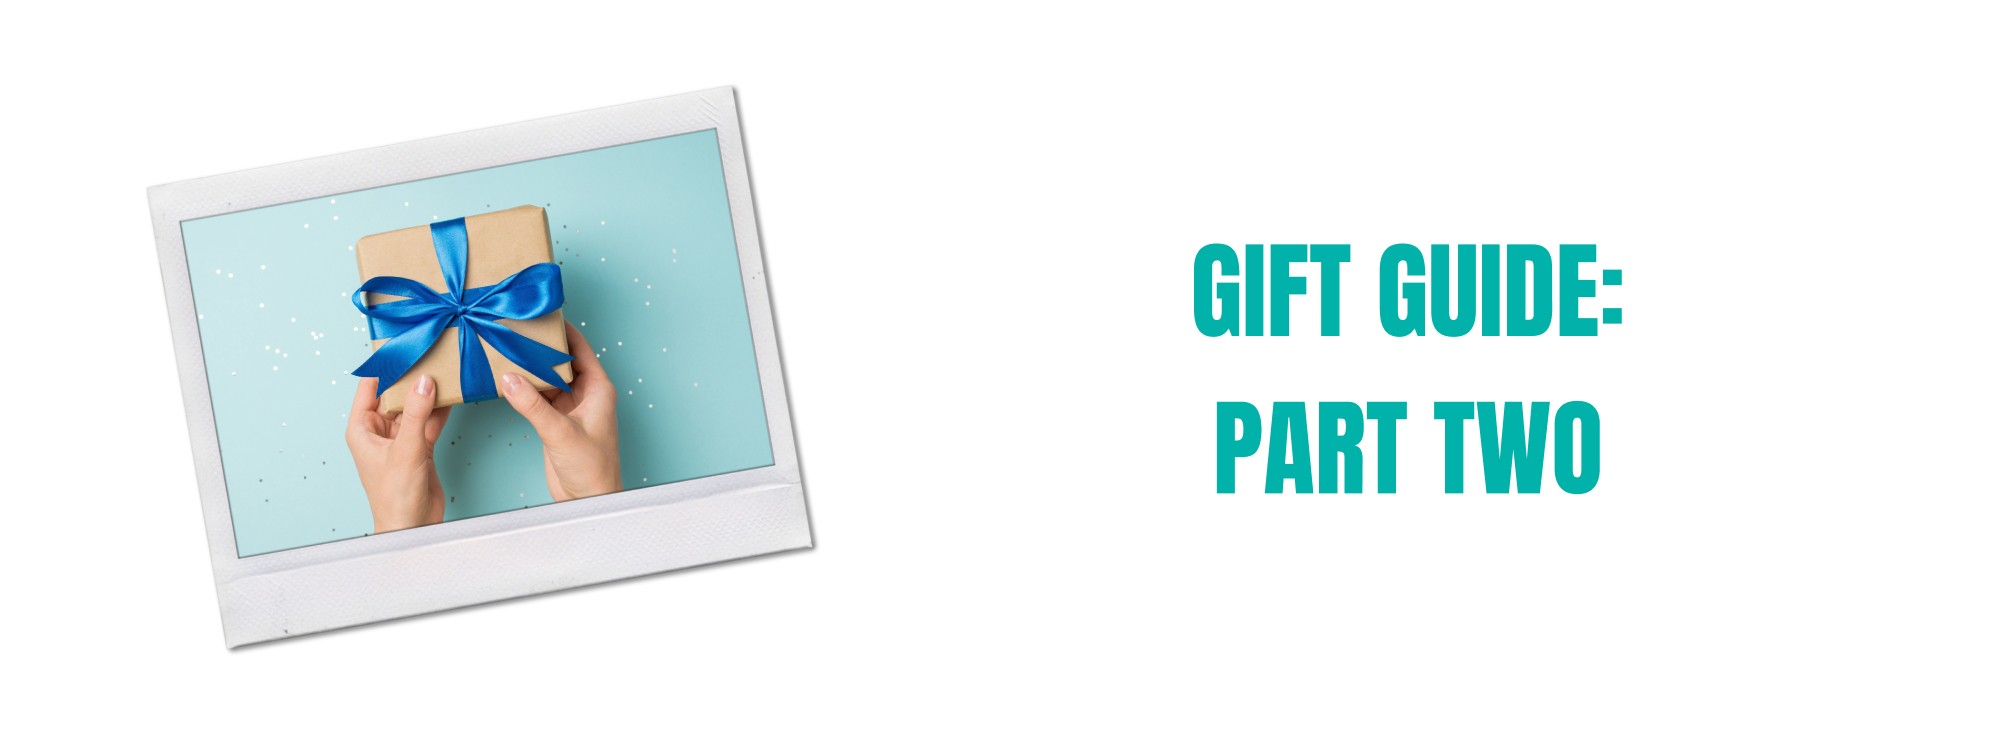 Snarky Holiday Gift Guide PartTwo